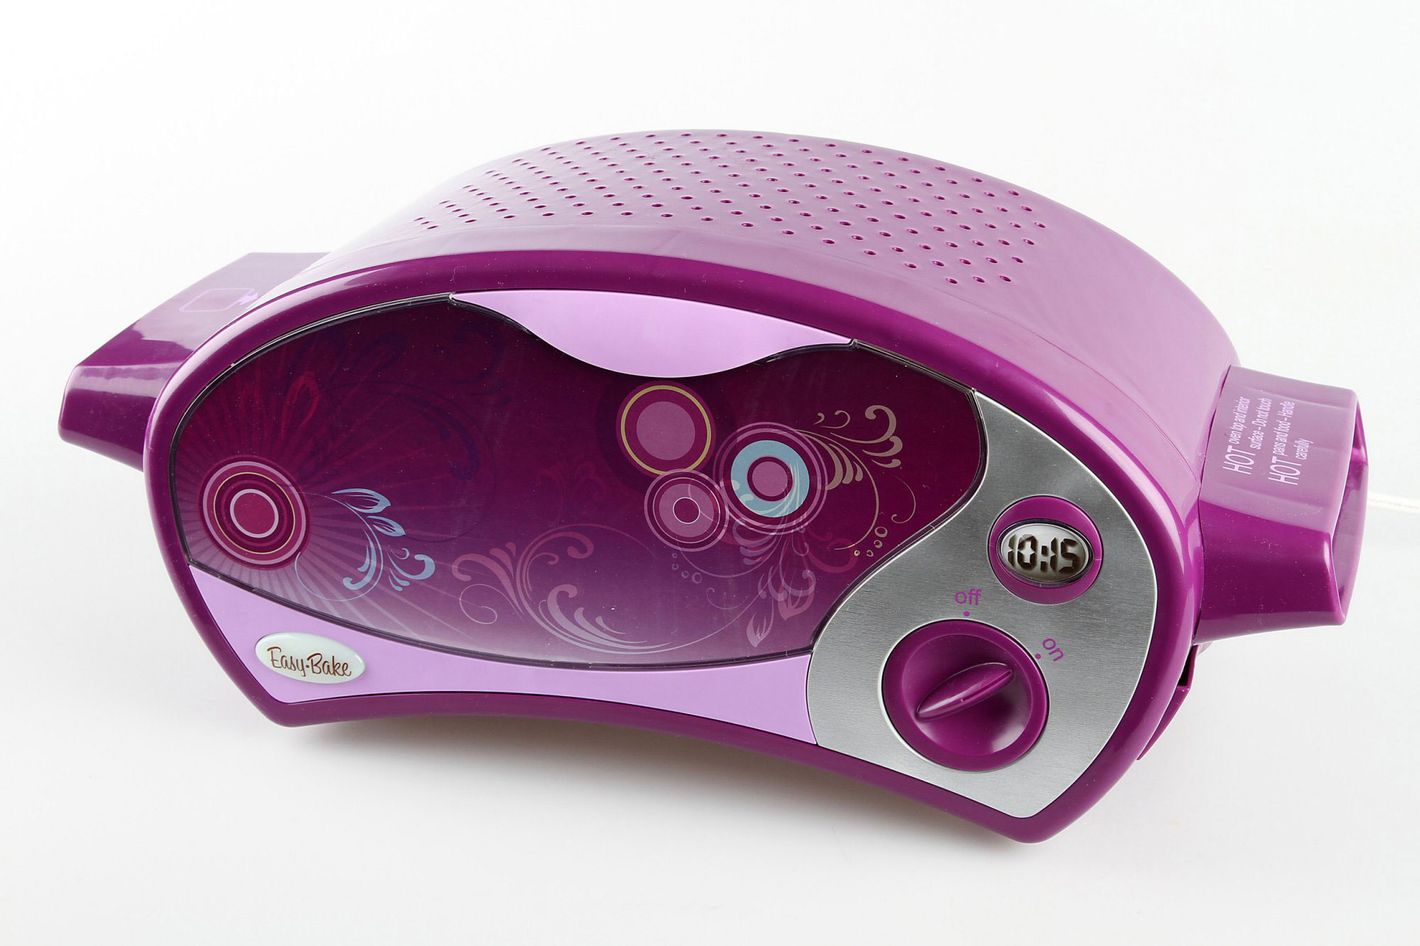 Eighth Grader Finds Easy-Bake Oven Sexist